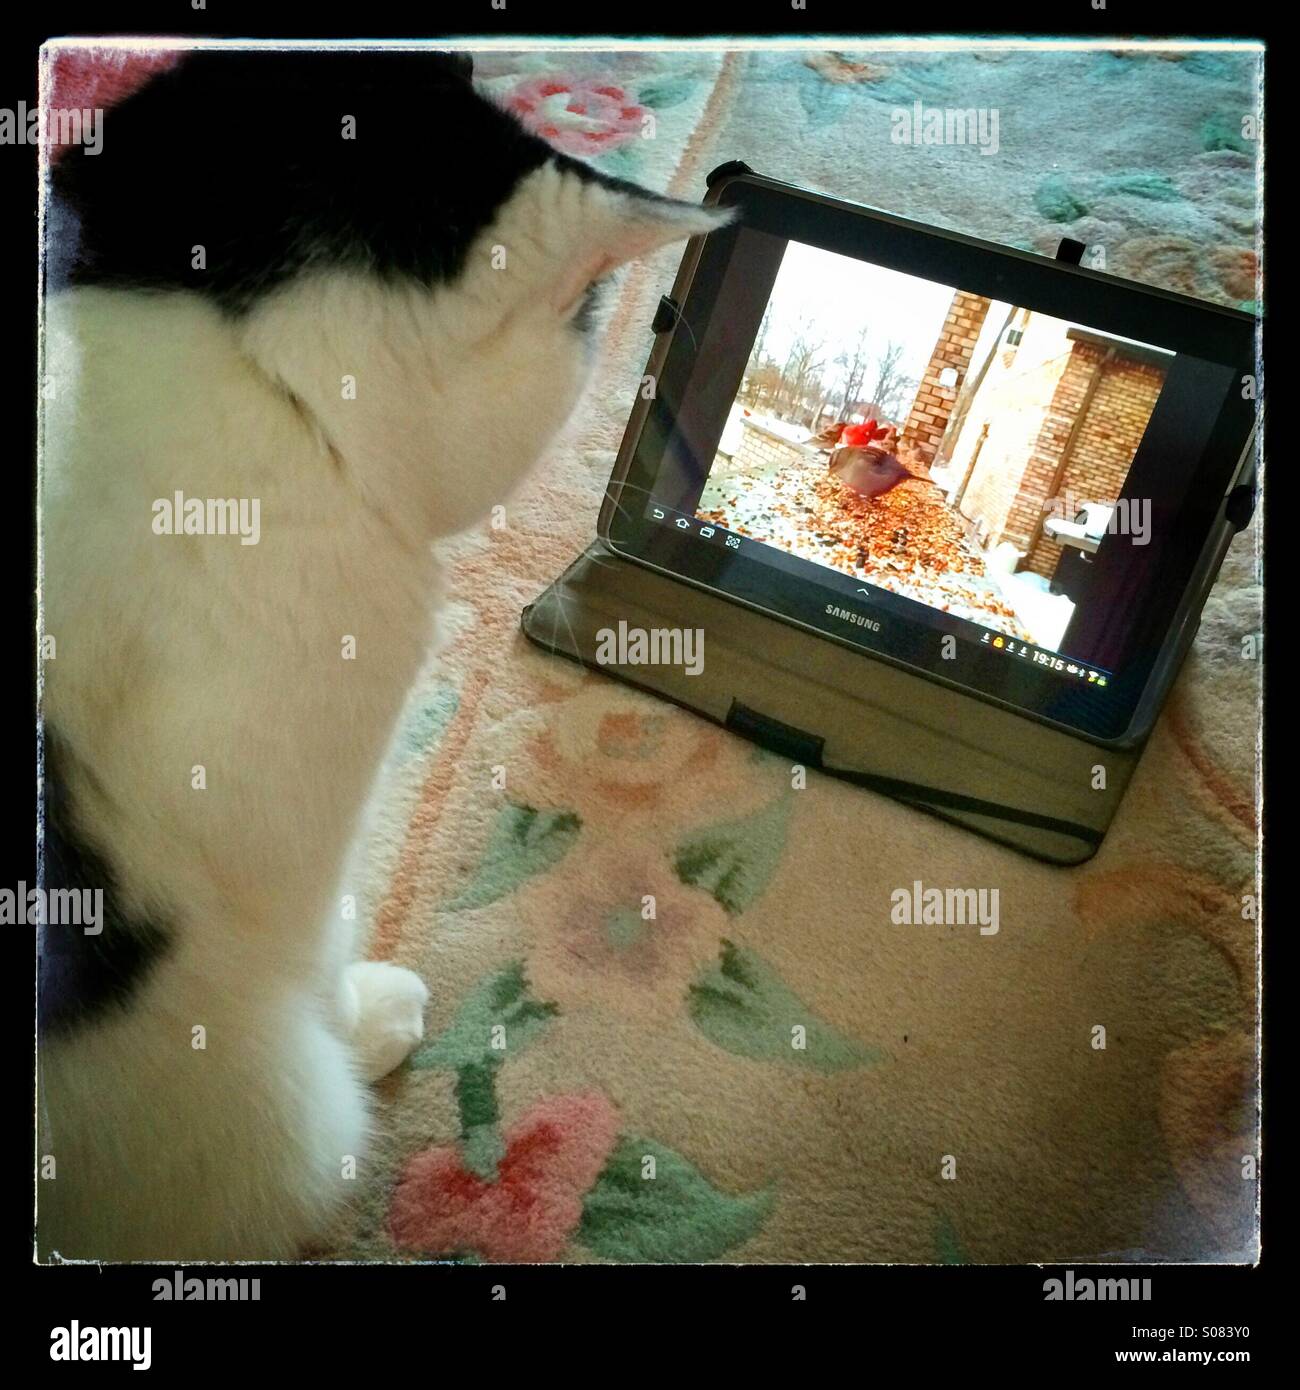 Domestic cat watching bird video on tablet Stock Photo